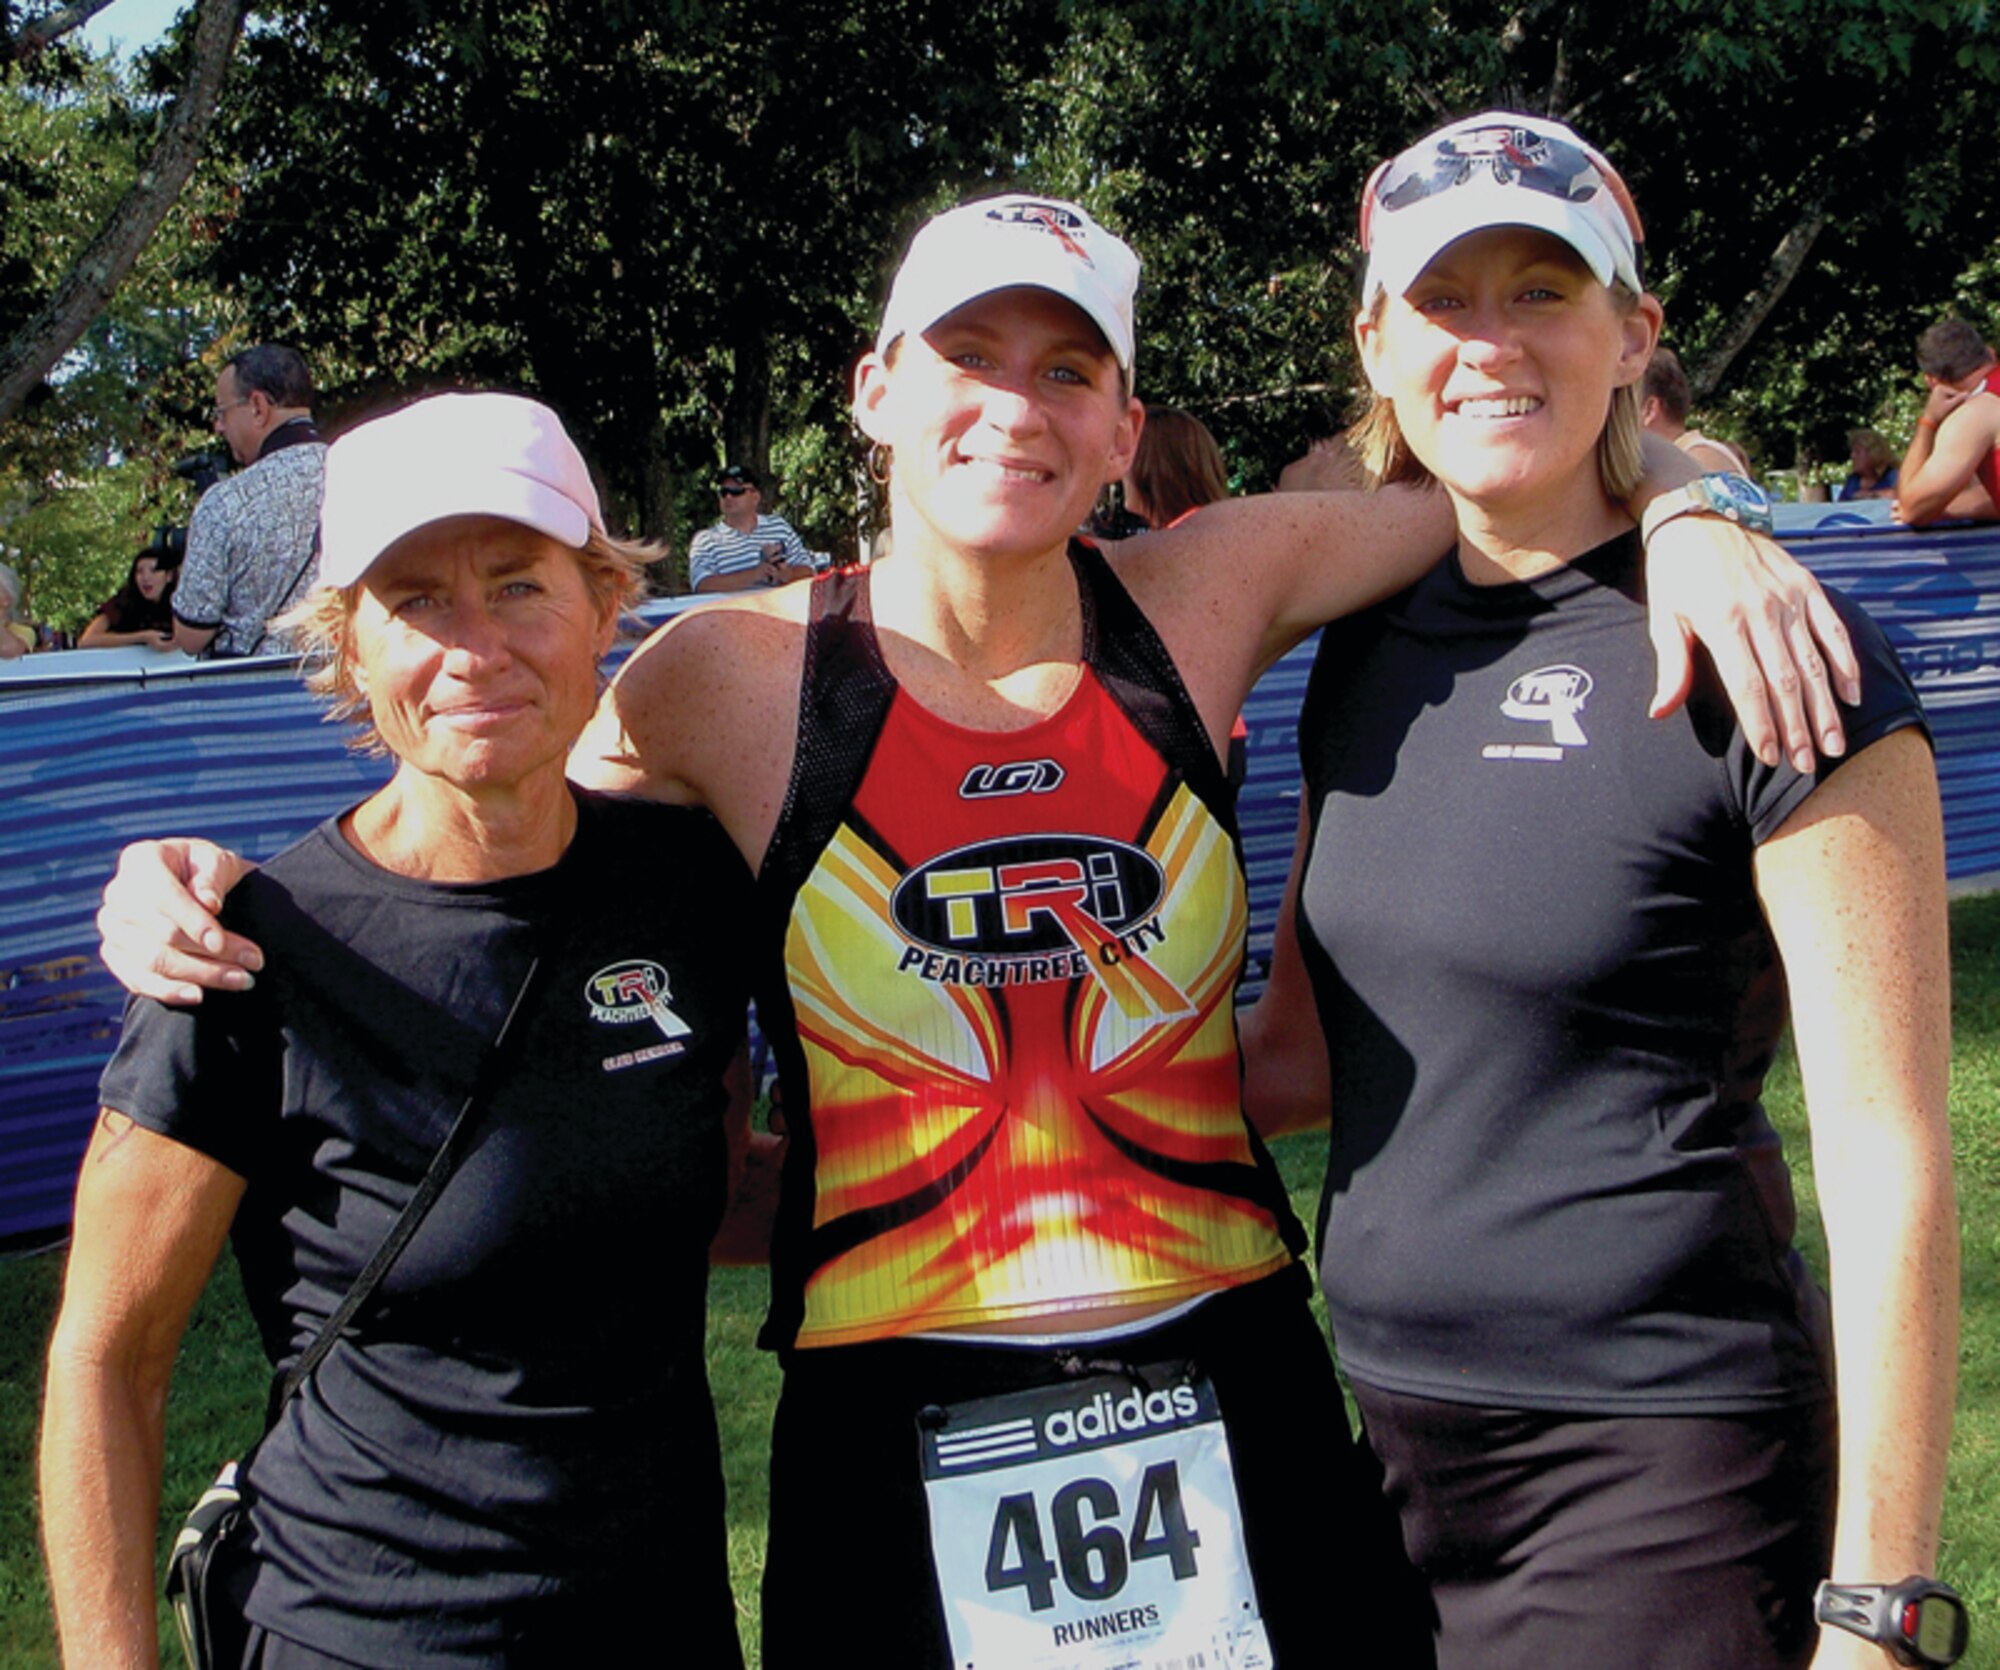 Twins Senior Airman Angela Burton, right, and Technical Sergeant Christy Henderson, middle, pose with their mother, Ann Henderson, after they won first place in the Women’s Relay Team category in the Callaway Gardens Triathlon on Sept. 6.